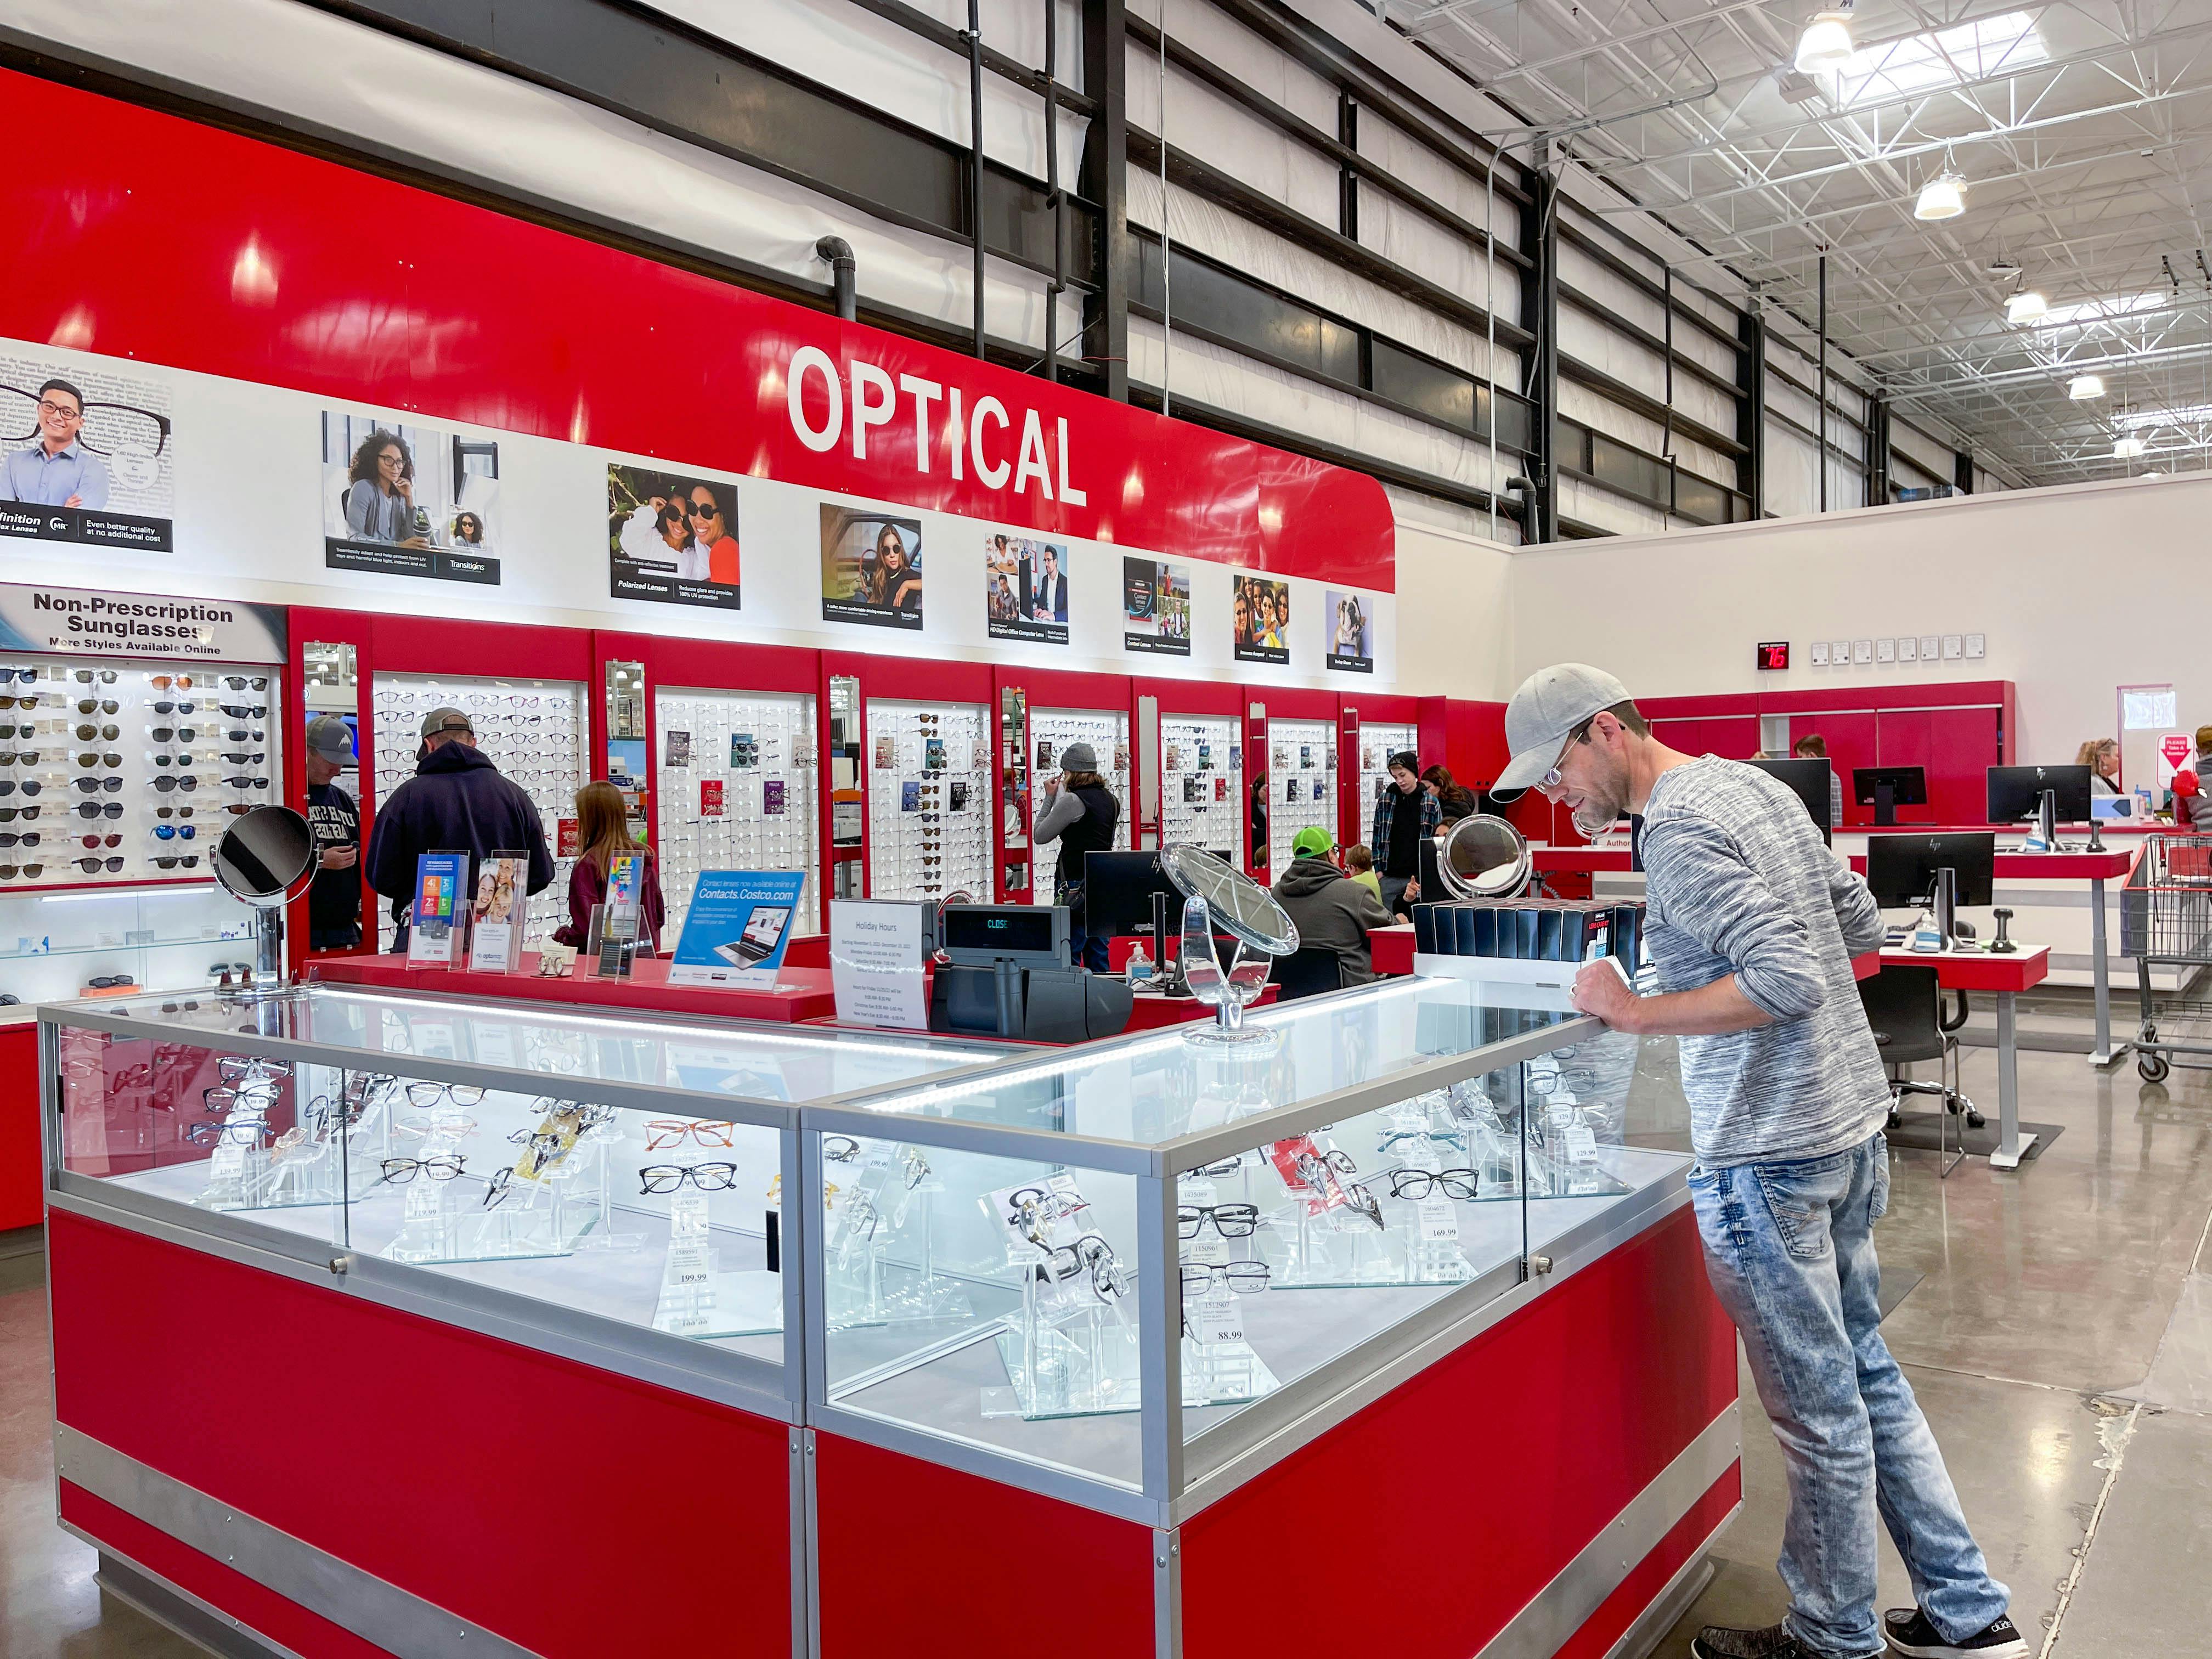 Costco Optical: How Much Their Glasses Cost